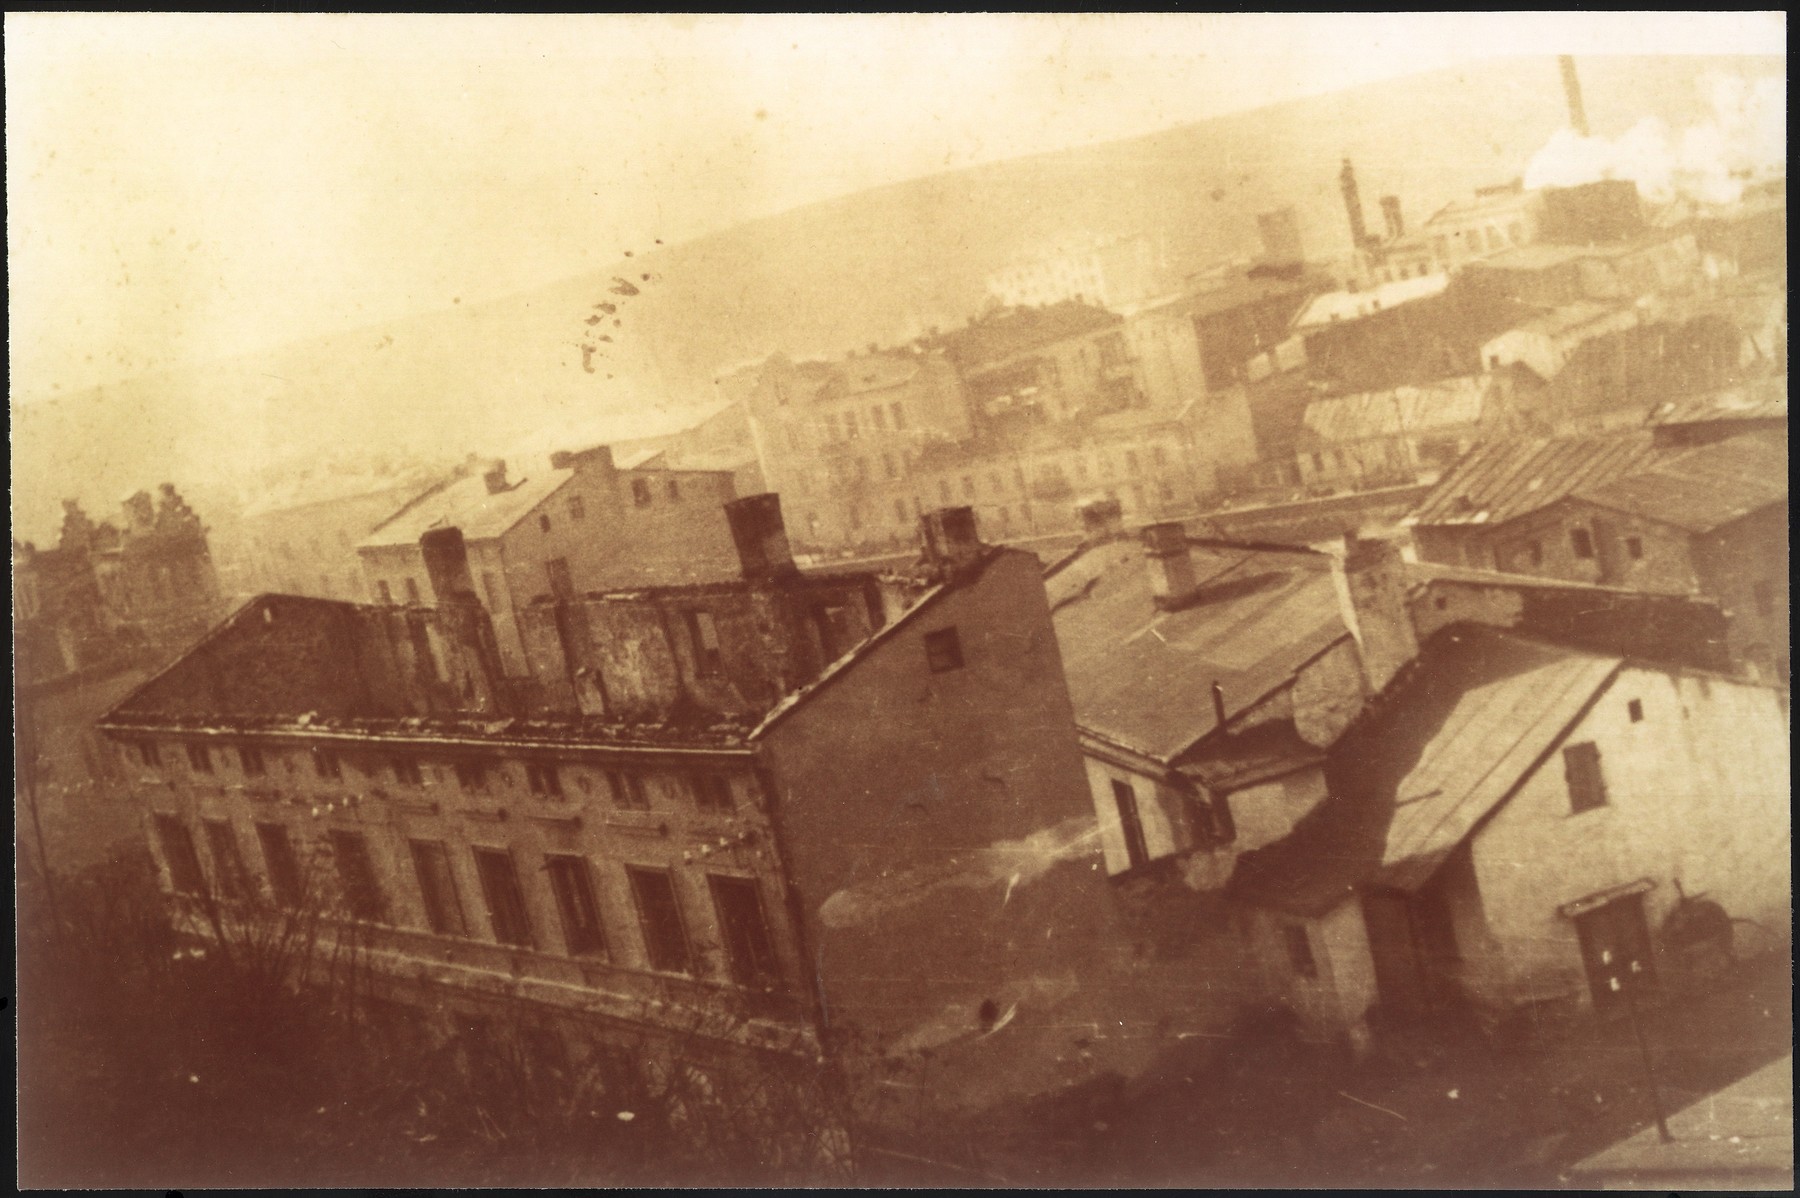 View of a bombed out building in Bedzin.